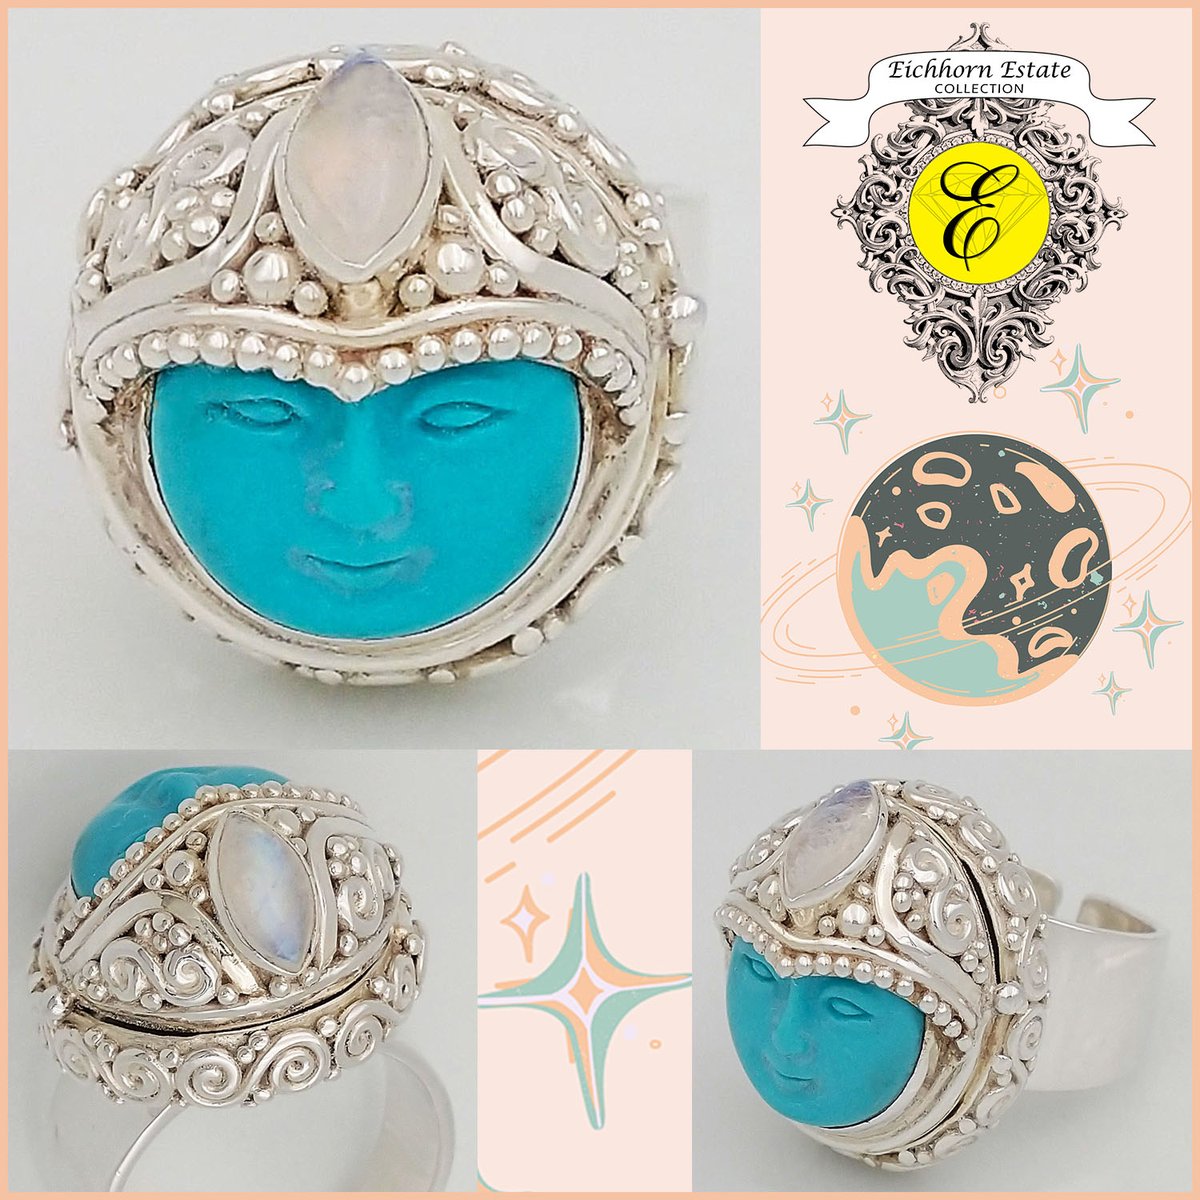 For the gal who likes the mystical, unique, curious, artsy, or unusual. Sterling silver Open Shank Ring with a treated Turquoise Carved Face and Moonstone, finger size 9. From Our Estate Collection $170. eichhornjewelry.com/estate-collect… #estatejewelry #turquoisejewelry #moonstonejewelry